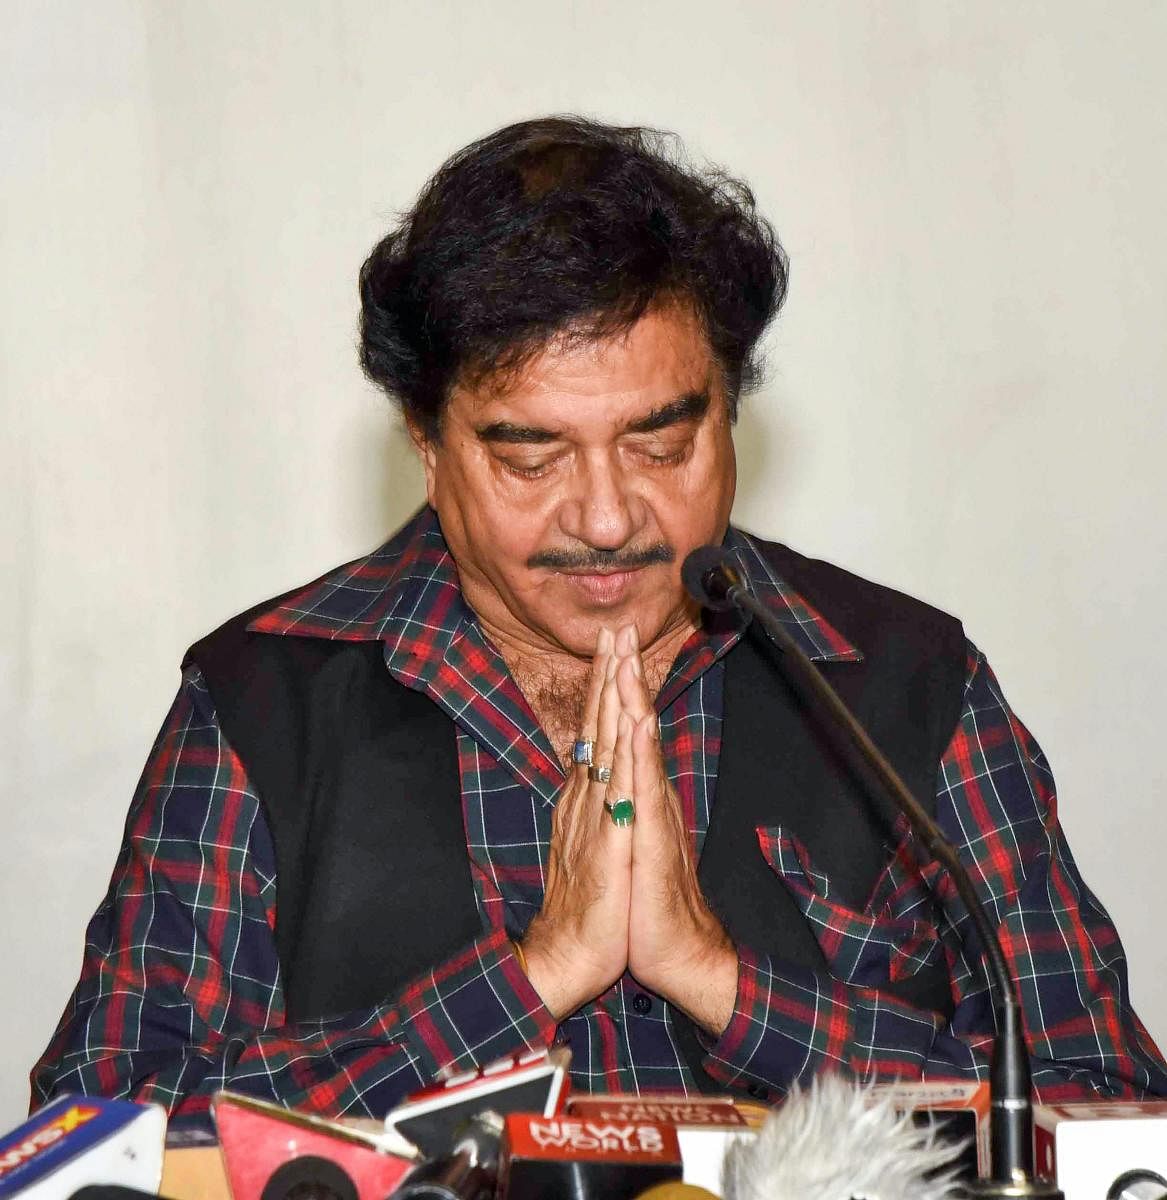 Congress candidate from Patna Sahib Shatrughan Sinha addresses a press conference after losing to BJP's Ravi Shankar Prasad in the Lok Sabha elections, in Patna, Thursday, May 23, 2019. (PTI Photo) 